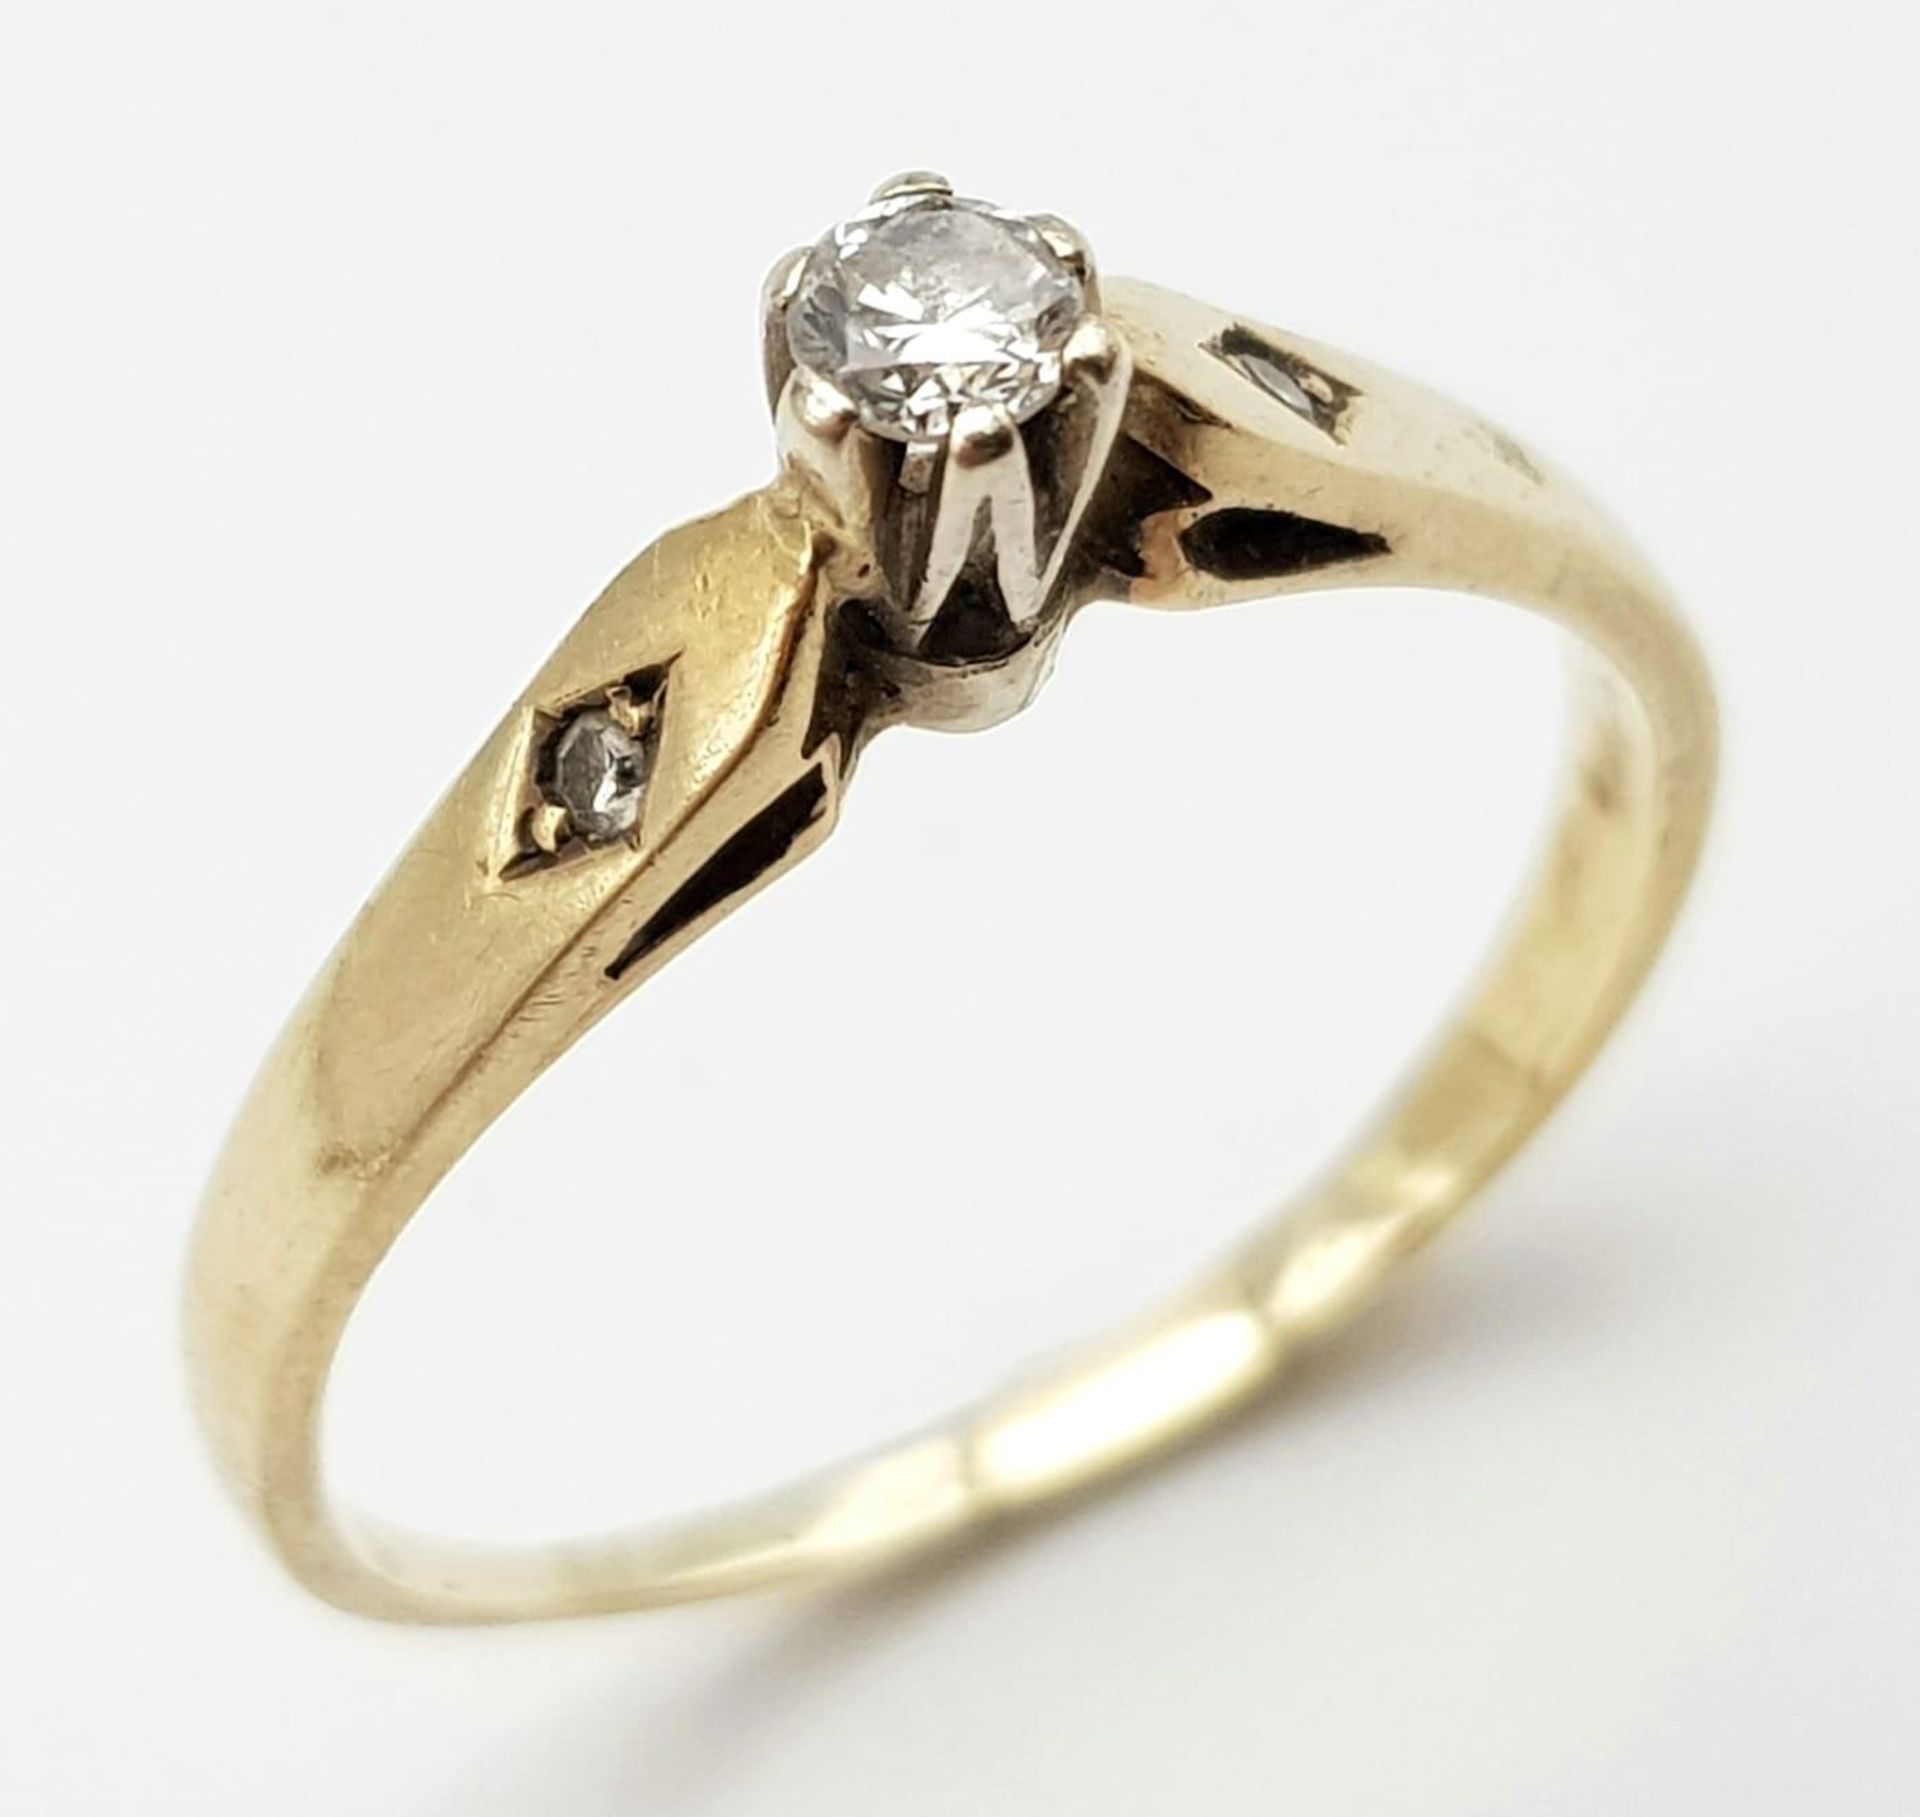 A 9K Yellow Gold Diamond Ring. 0.2ct central diamond with diamond accents. Size M 1/2. 1.52g total